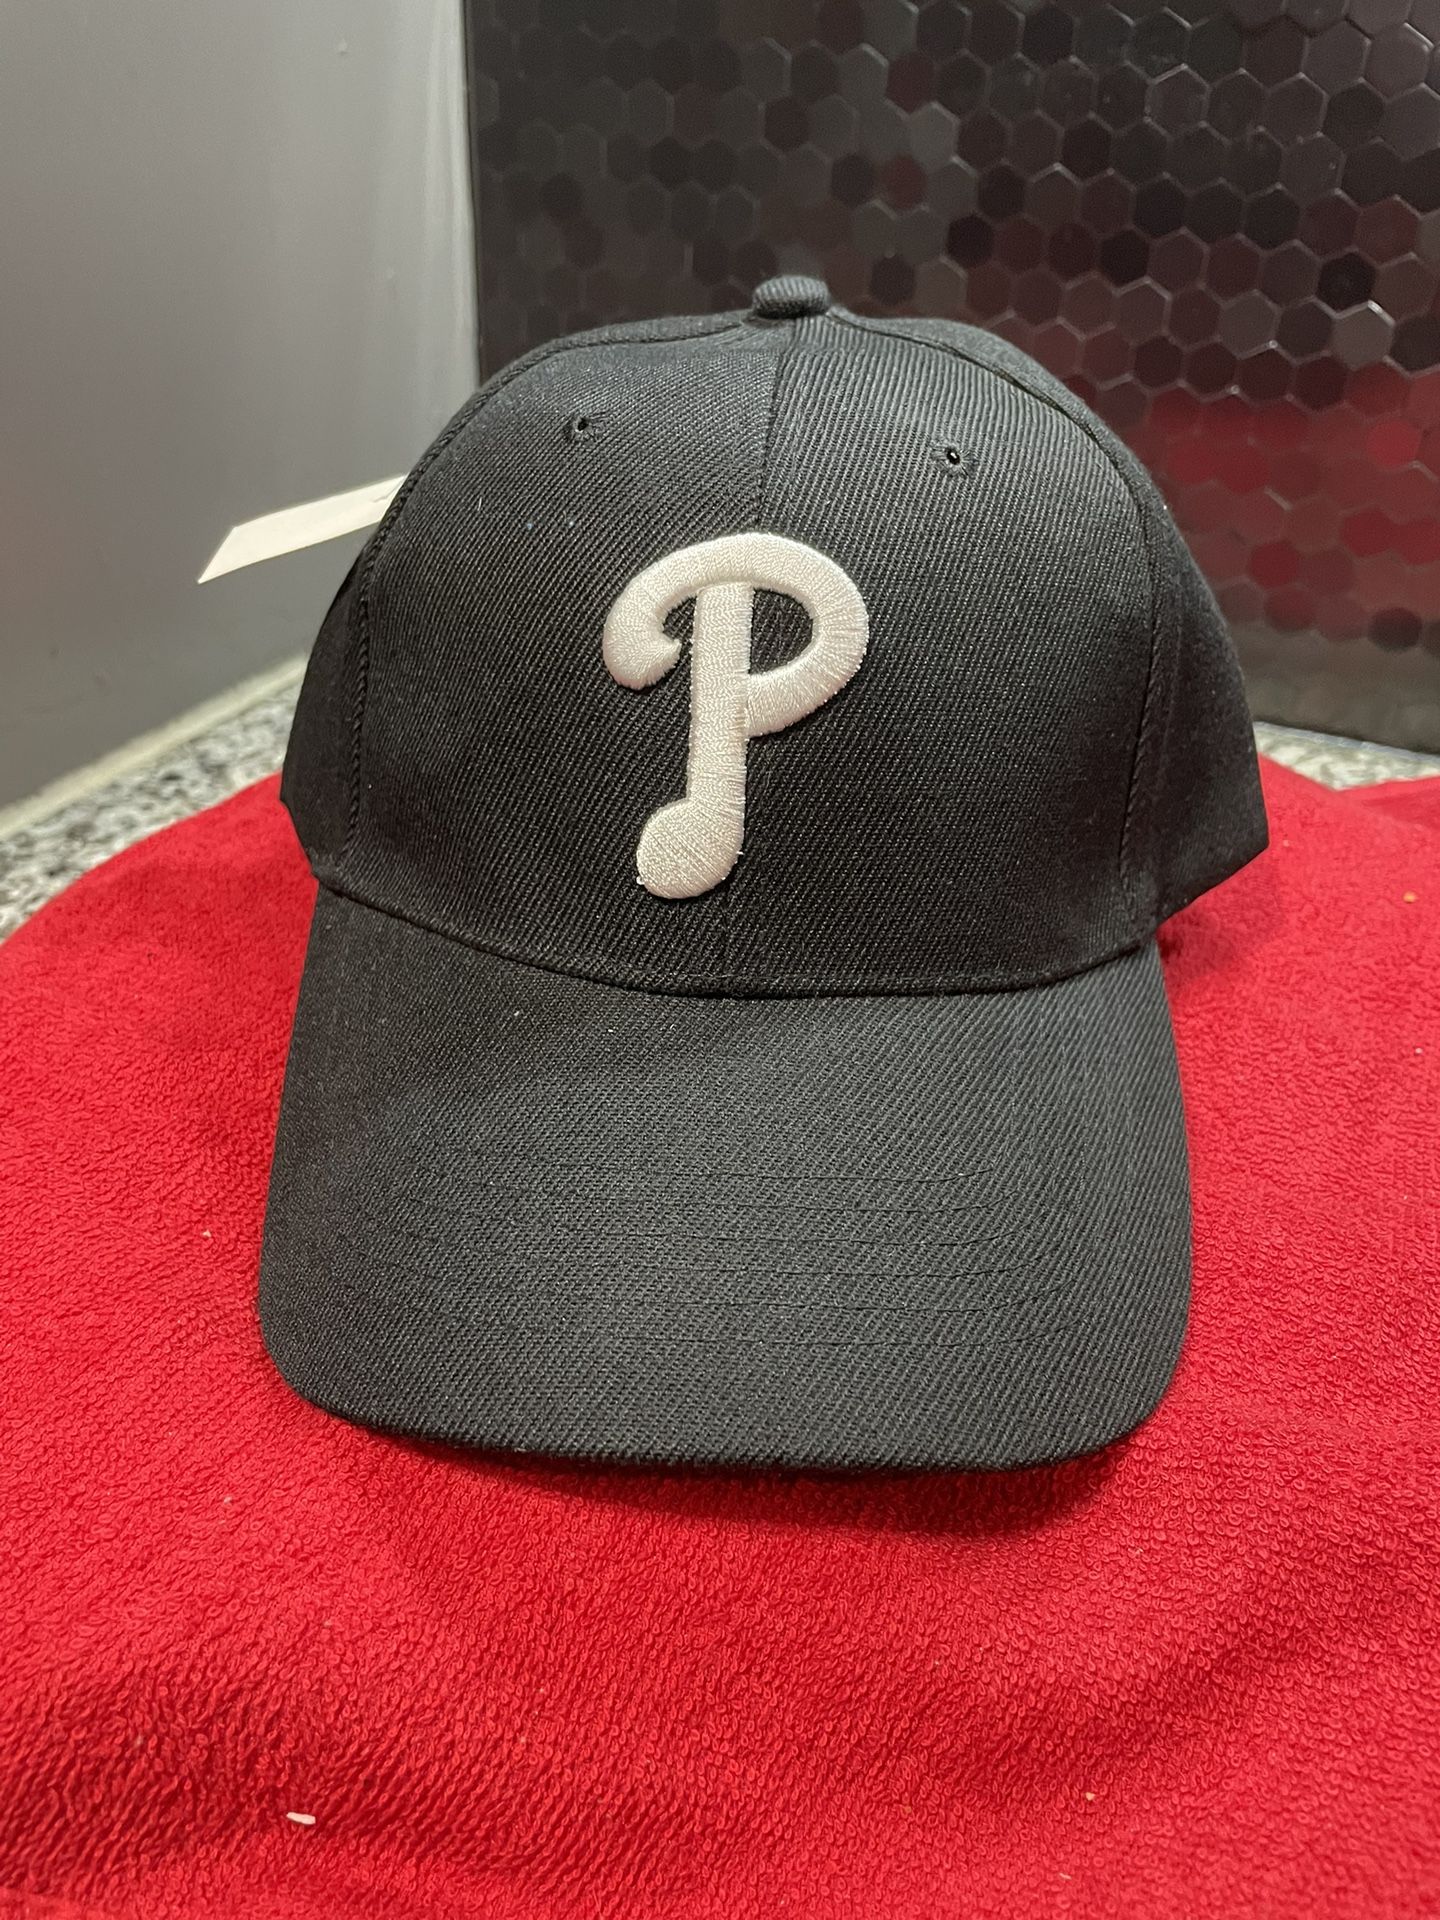 (Rare) Phillies Phanatic fitted hat for Sale in Philadelphia, PA - OfferUp